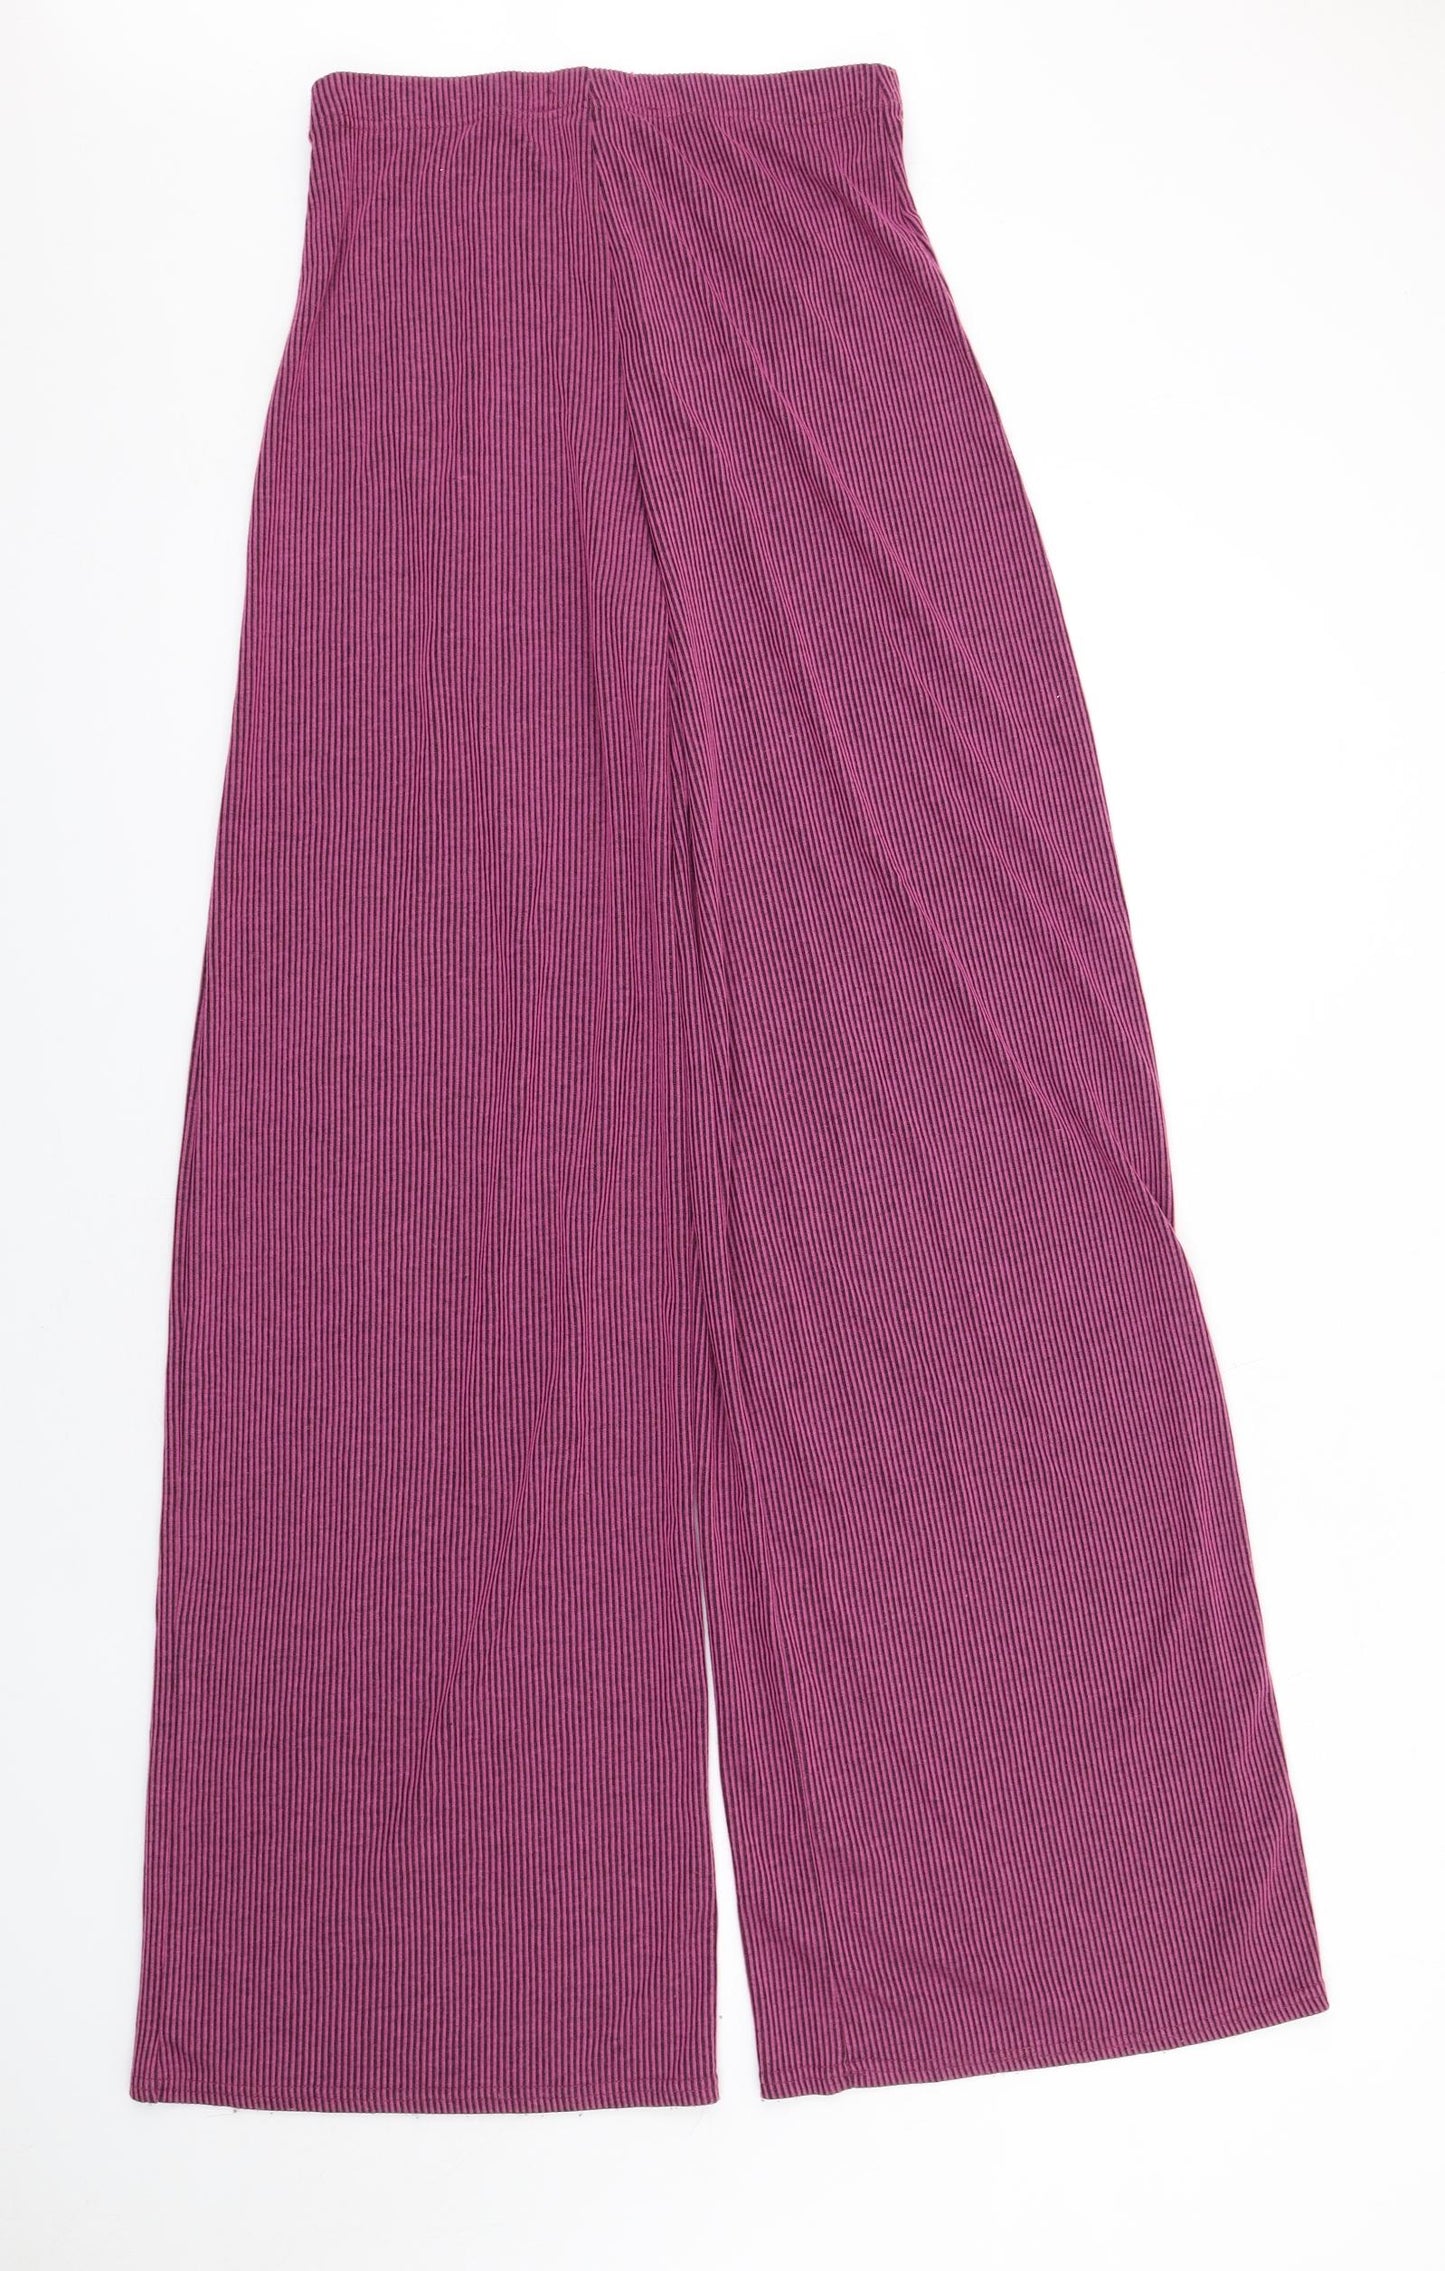 Long Tall Sally Womens Pink Striped Polyester Trousers Size 10 L35 in Regular